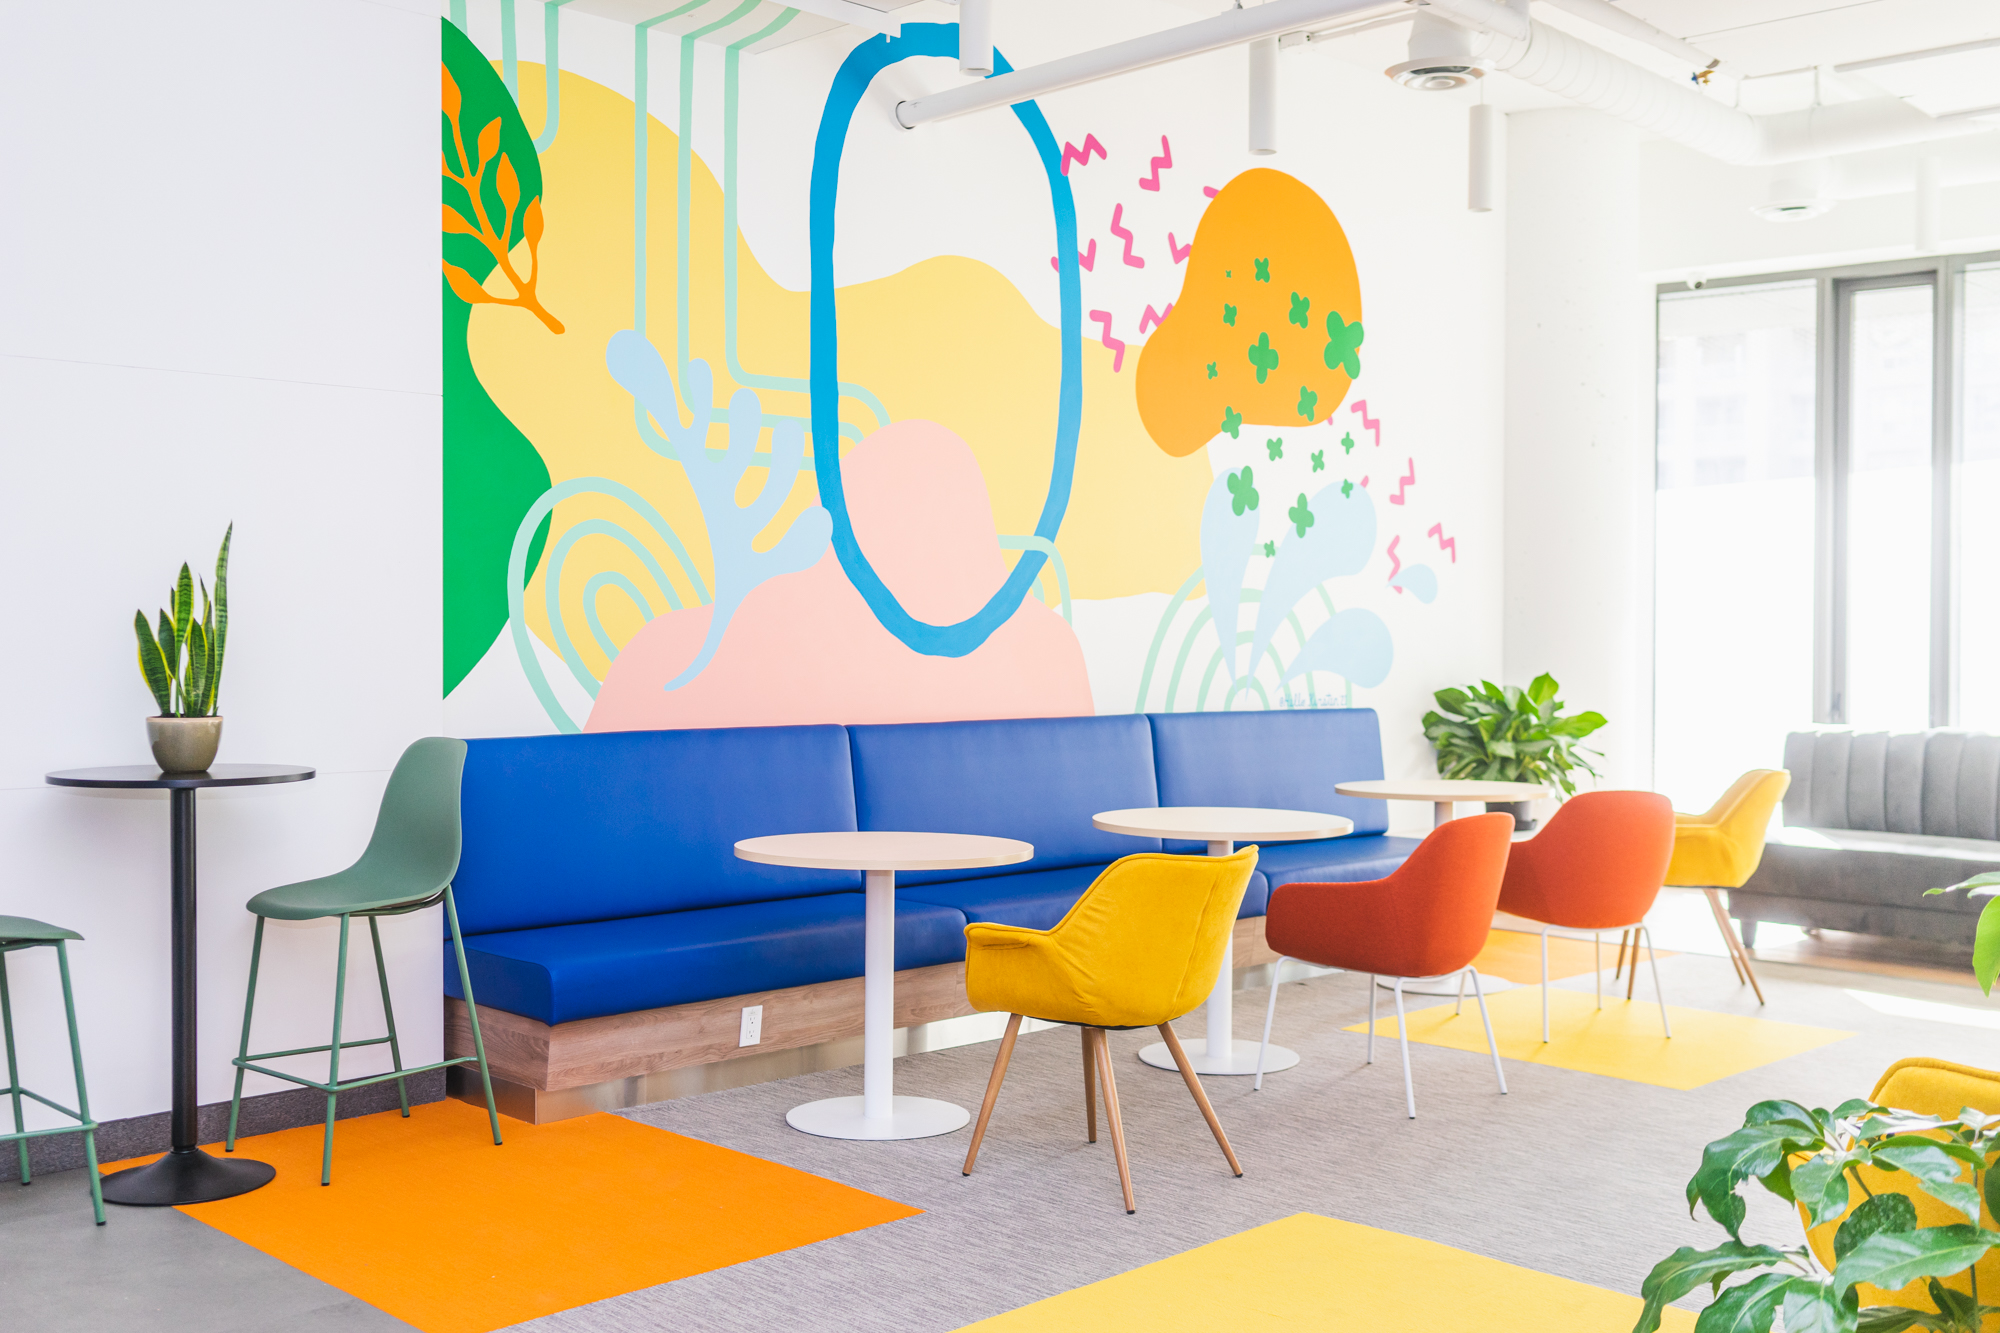 Indoor mural featuring colourful patterns and shapes